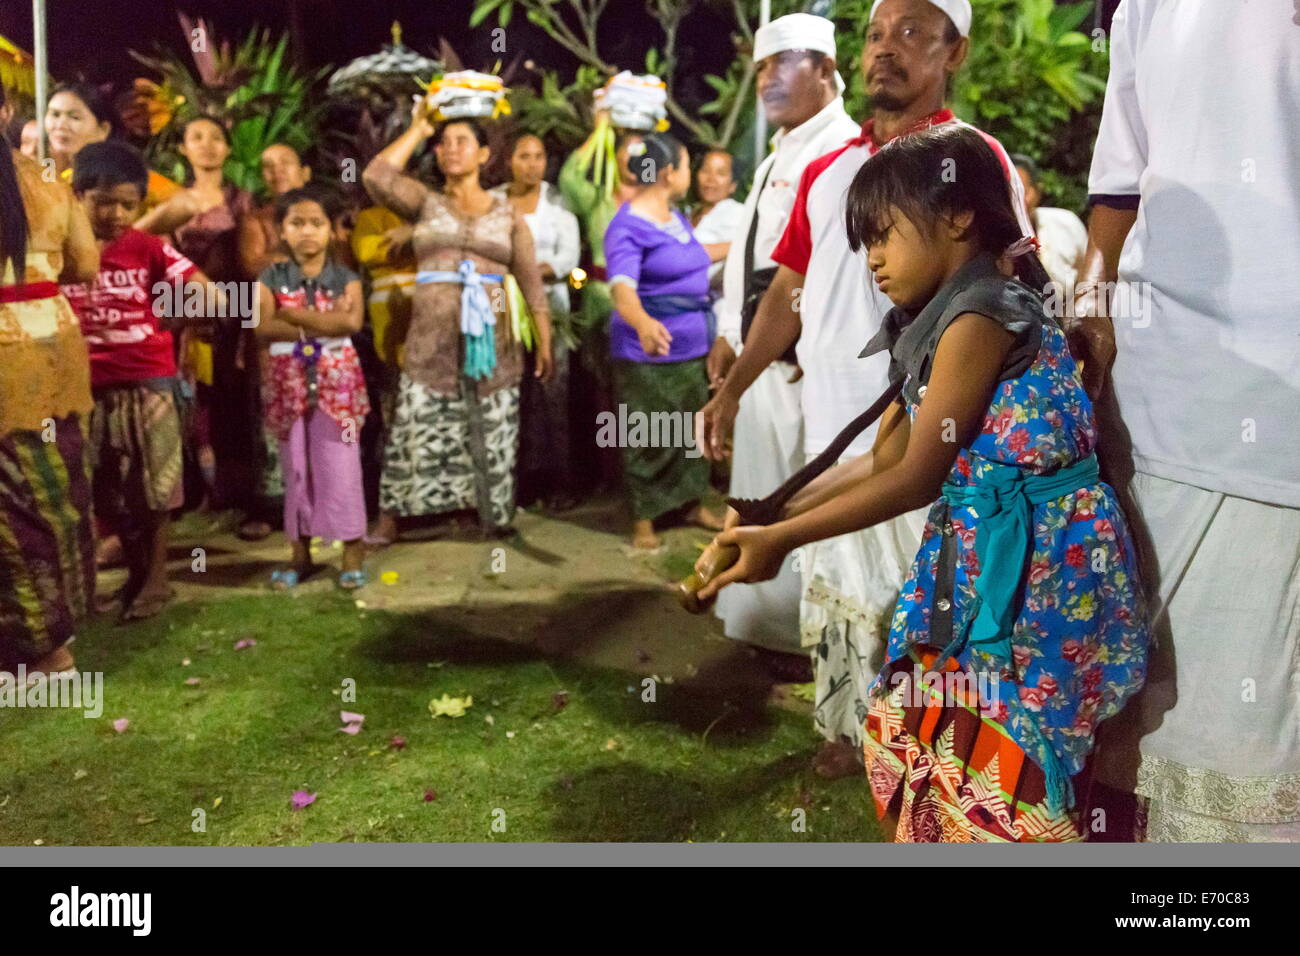 Pemuteran, Bali, Indonesia. 2nd Aug, 2013. Indonesian families participate int he Dewayu Trance Dance in remote North West Bali. Participants fly into a wild trance before taking a Kris (Traditional Dagger) to their chests. The power of the Hindu Gods is thought to protect those involved from injury. Children as young as 6 are encouraged to participate. © Brook Mitchell/ZUMA Wire/ZUMAPRESS.com/Alamy Live News Stock Photo